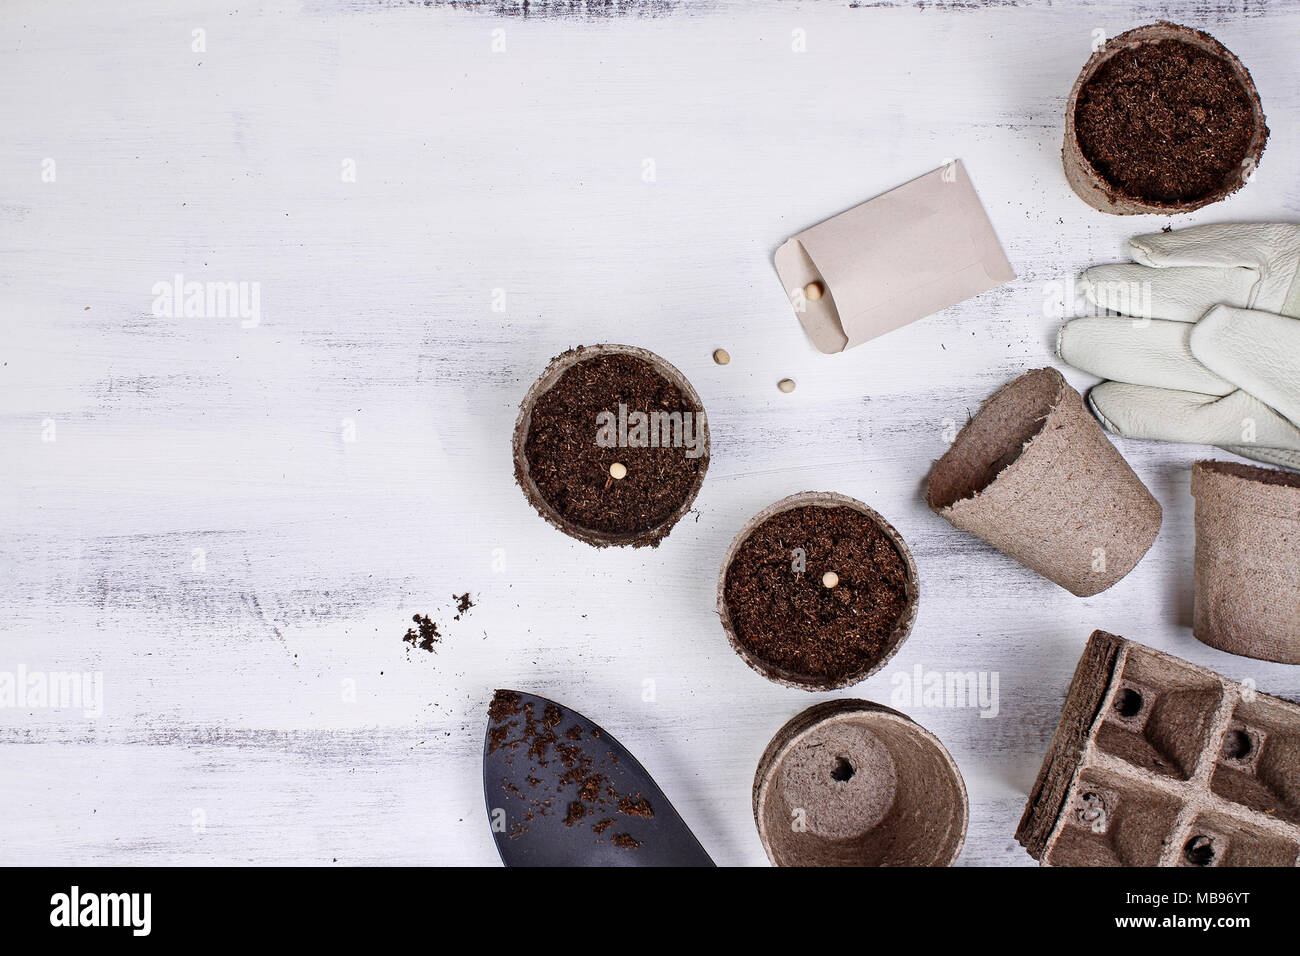 Gardening tools, seeds and soil on a white wooden table. Image shot from above in flat lay style. Stock Photo